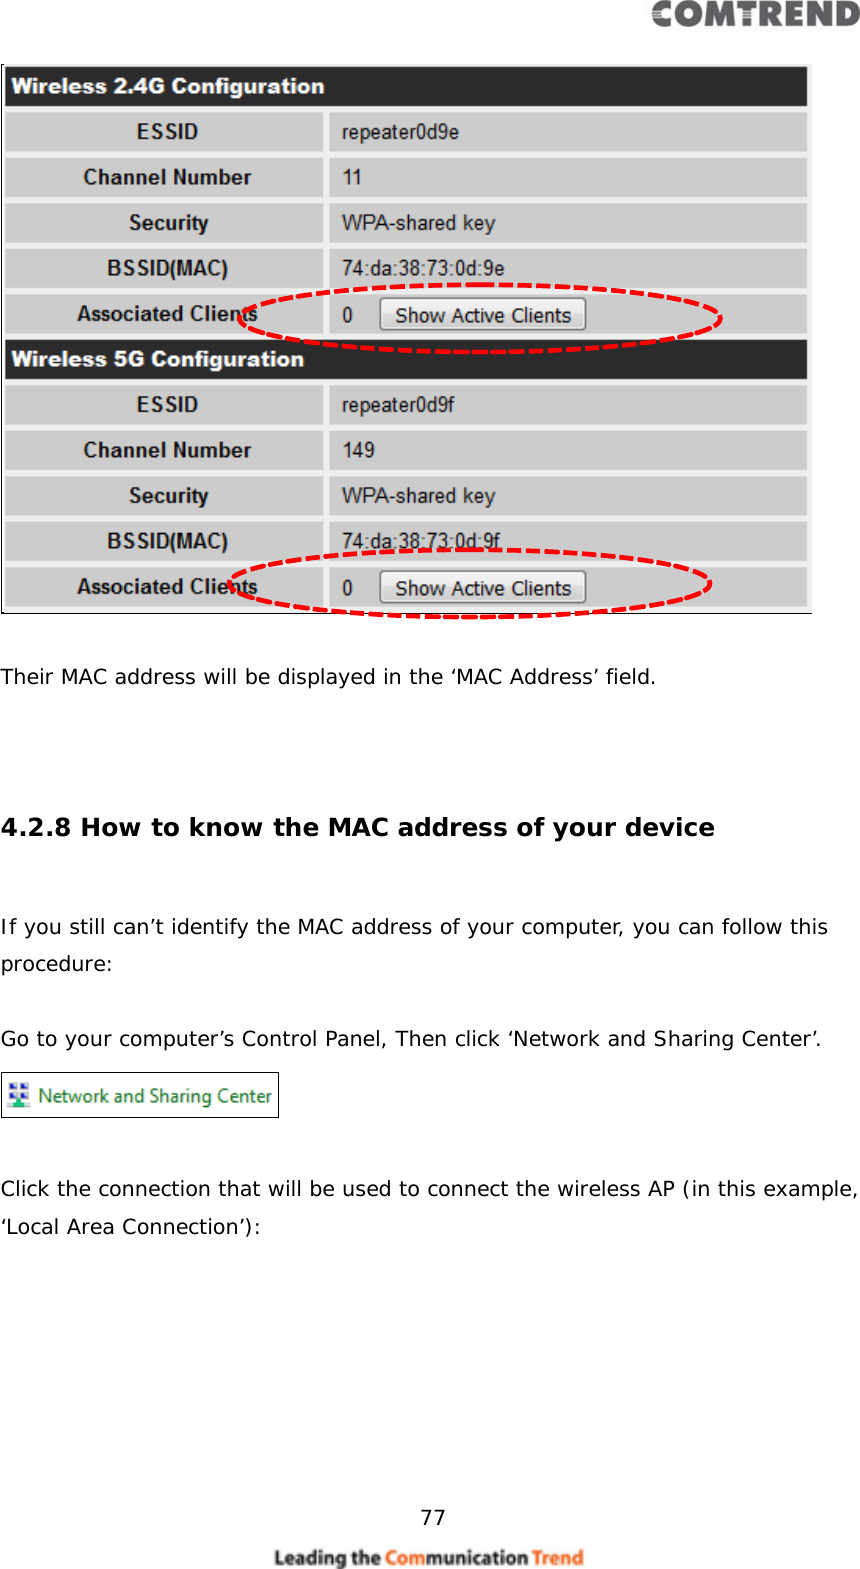     77    Their MAC address will be displayed in the ‘MAC Address’ field.    4.2.8 How to know the MAC address of your device  If you still can’t identify the MAC address of your computer, you can follow this procedure:  Go to your computer’s Control Panel, Then click ‘Network and Sharing Center’.   Click the connection that will be used to connect the wireless AP (in this example, ‘Local Area Connection’):  